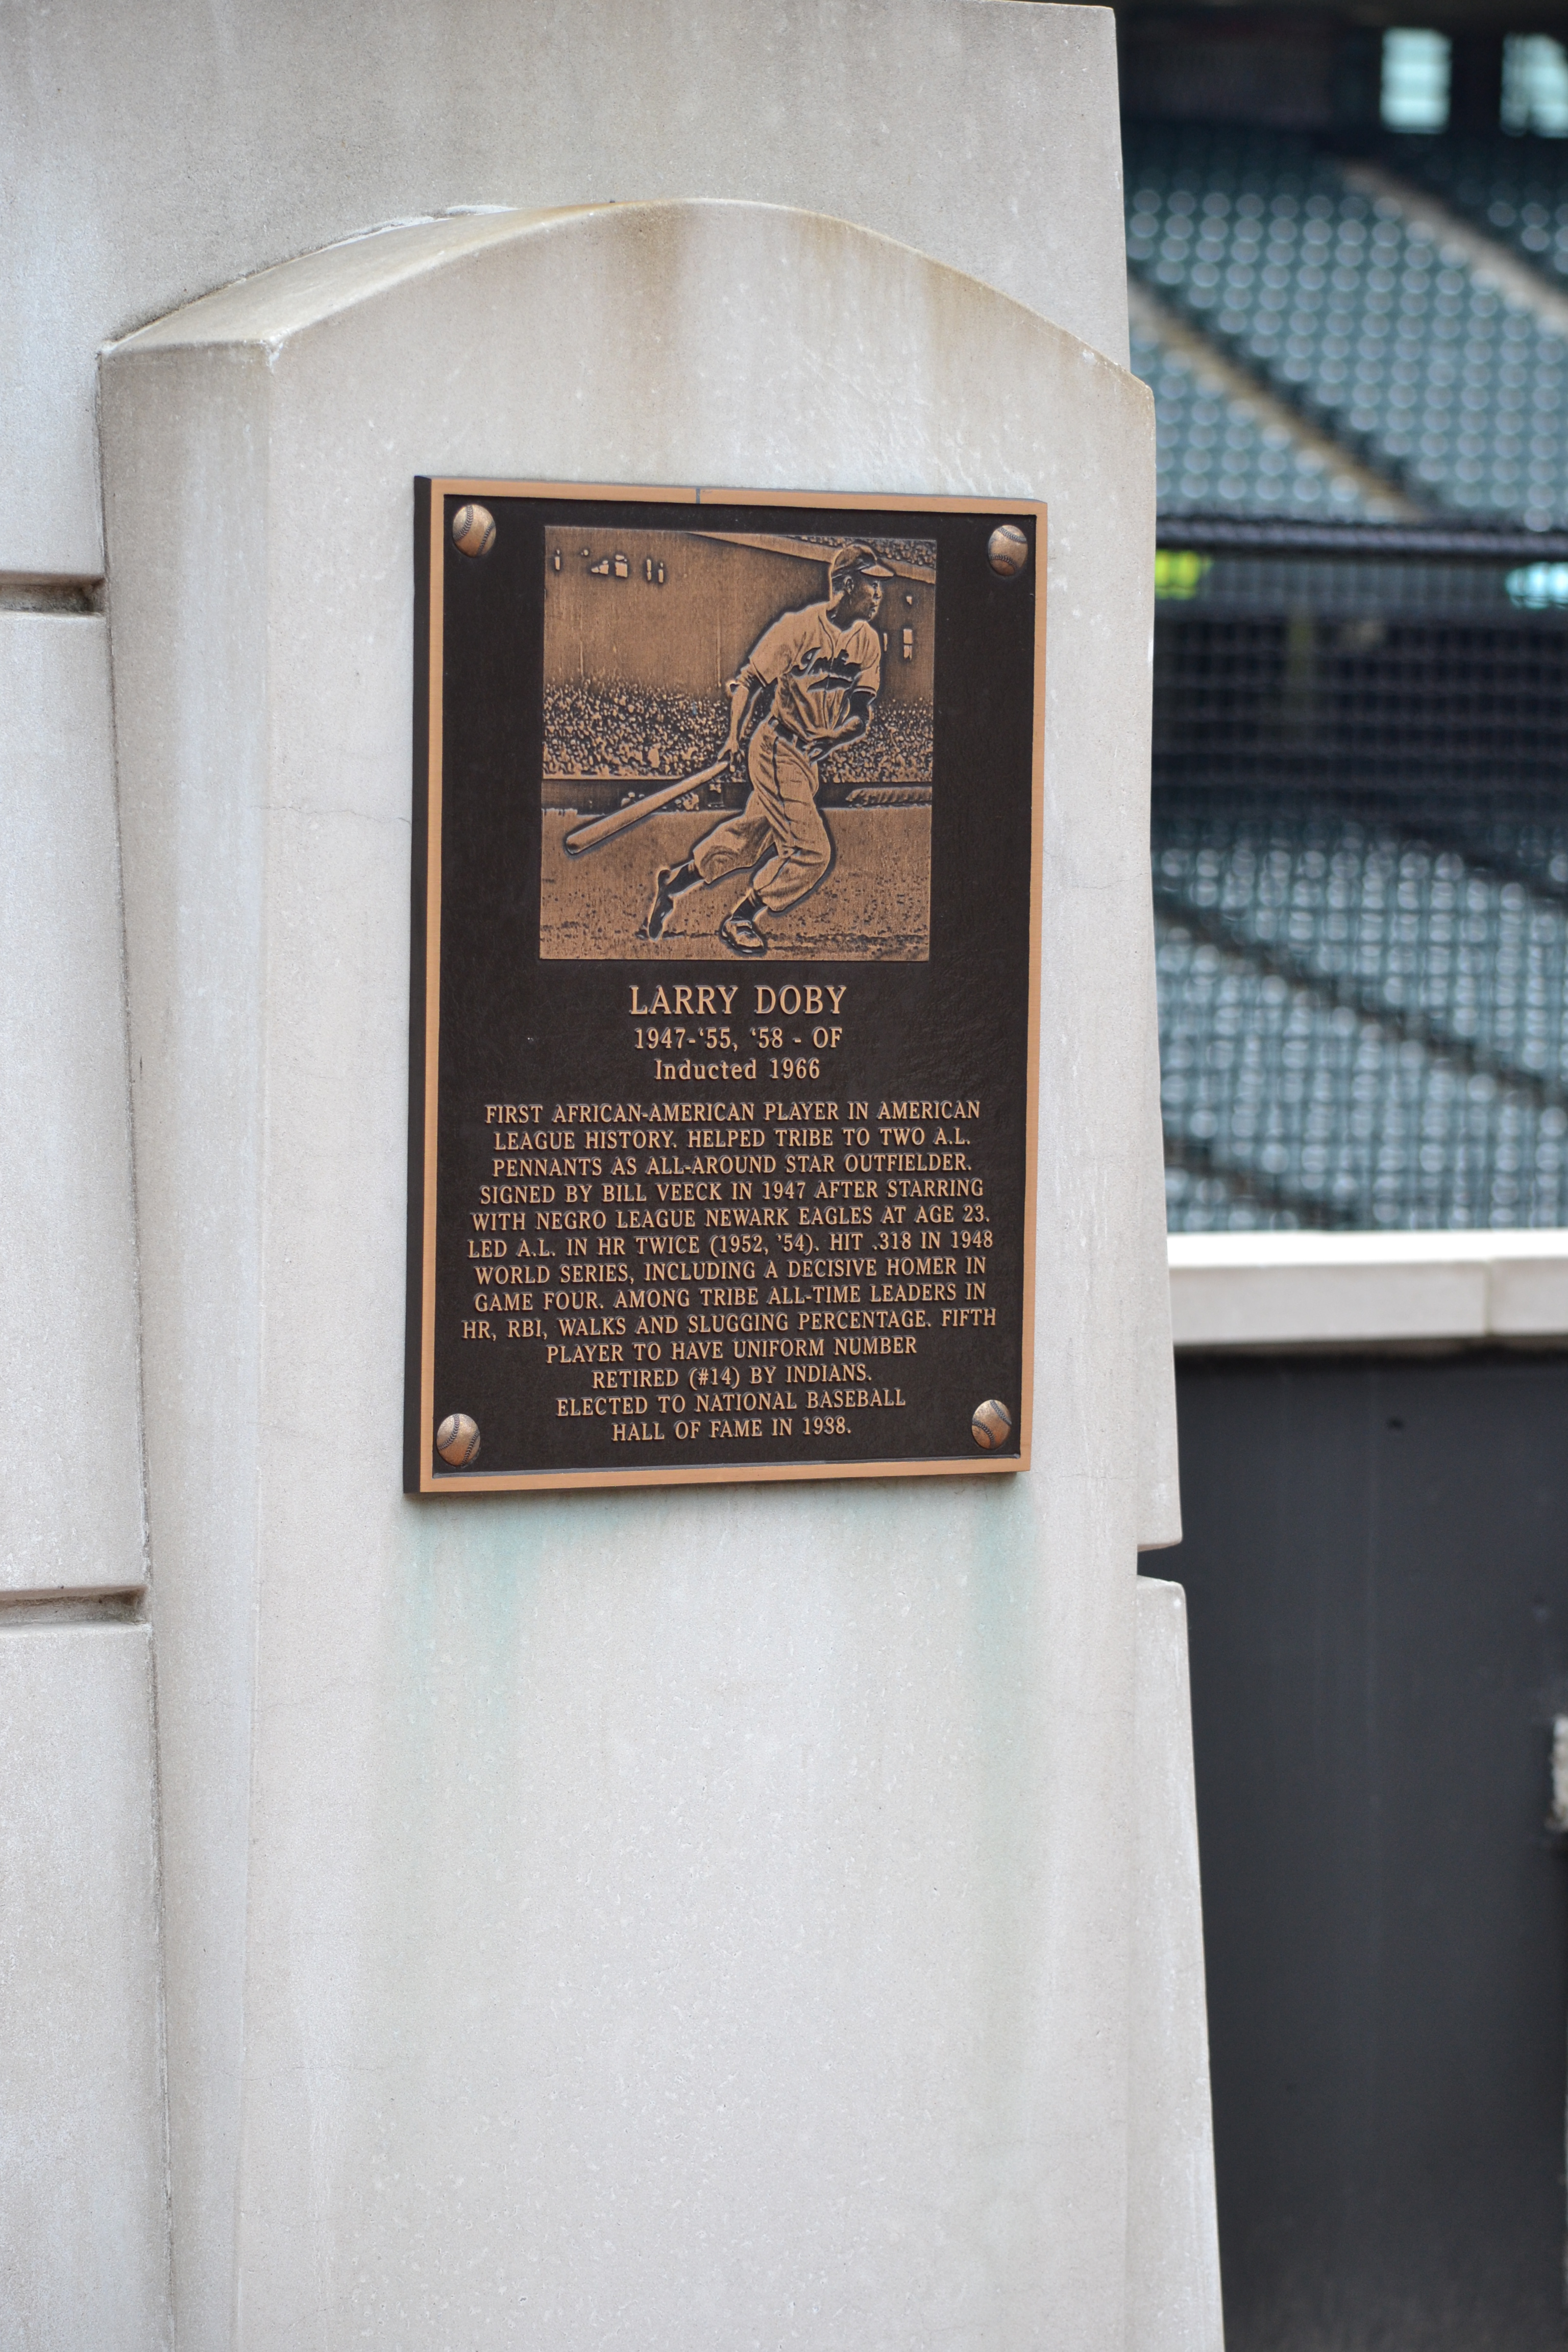 Paterson, N.J. honors Larry Doby, who broke the American League's